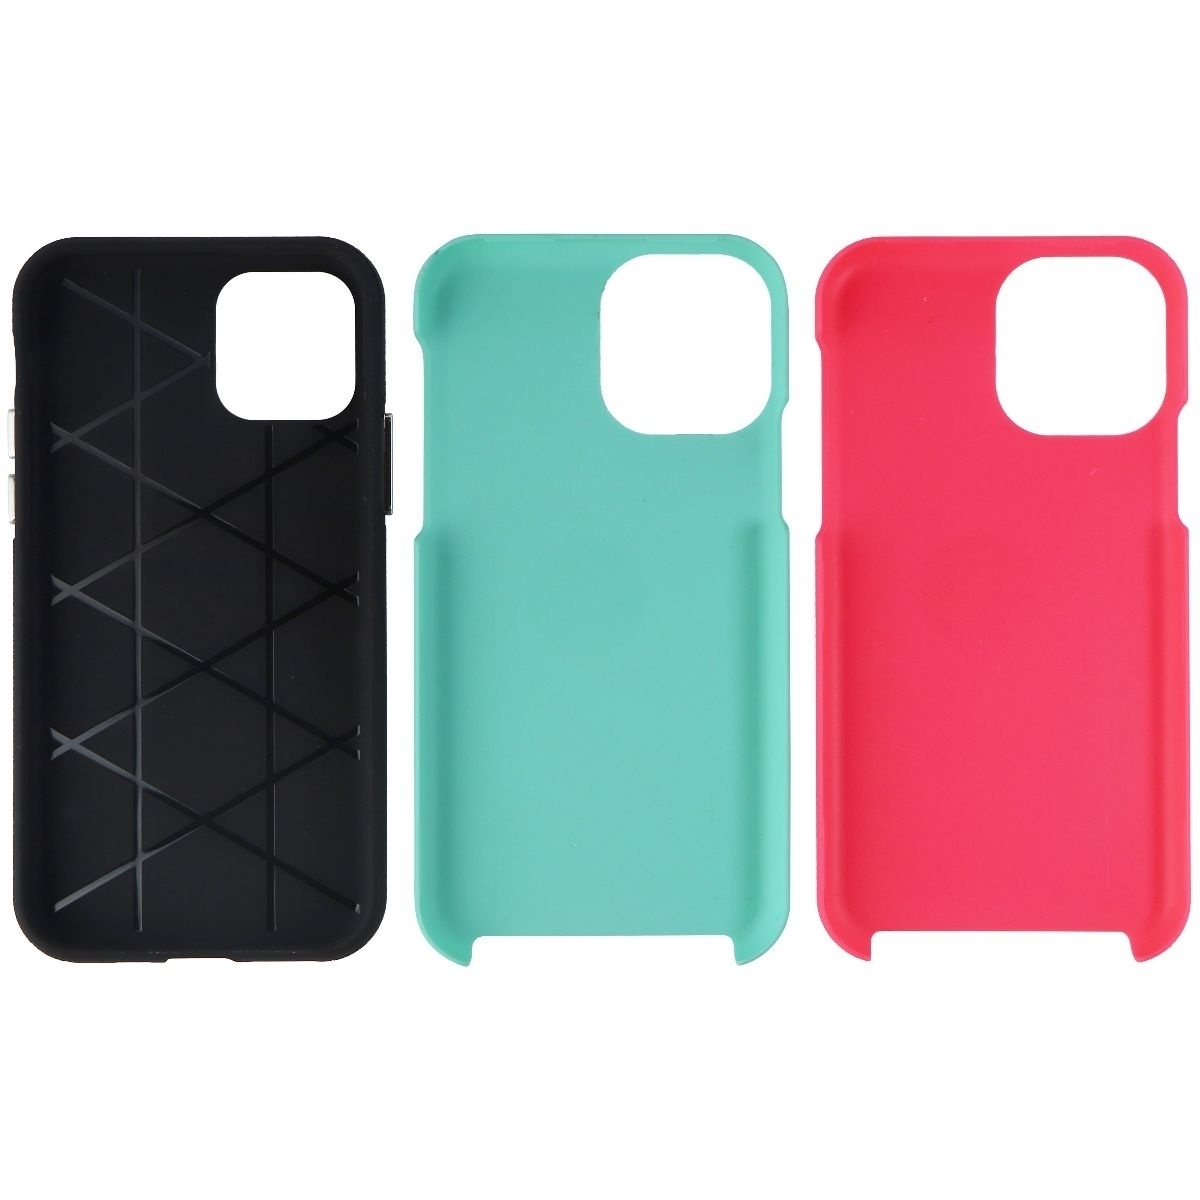 Blu Element Armour 2x Case & Colour Kit For IPhone 11 Pro - Black/Green/Pink